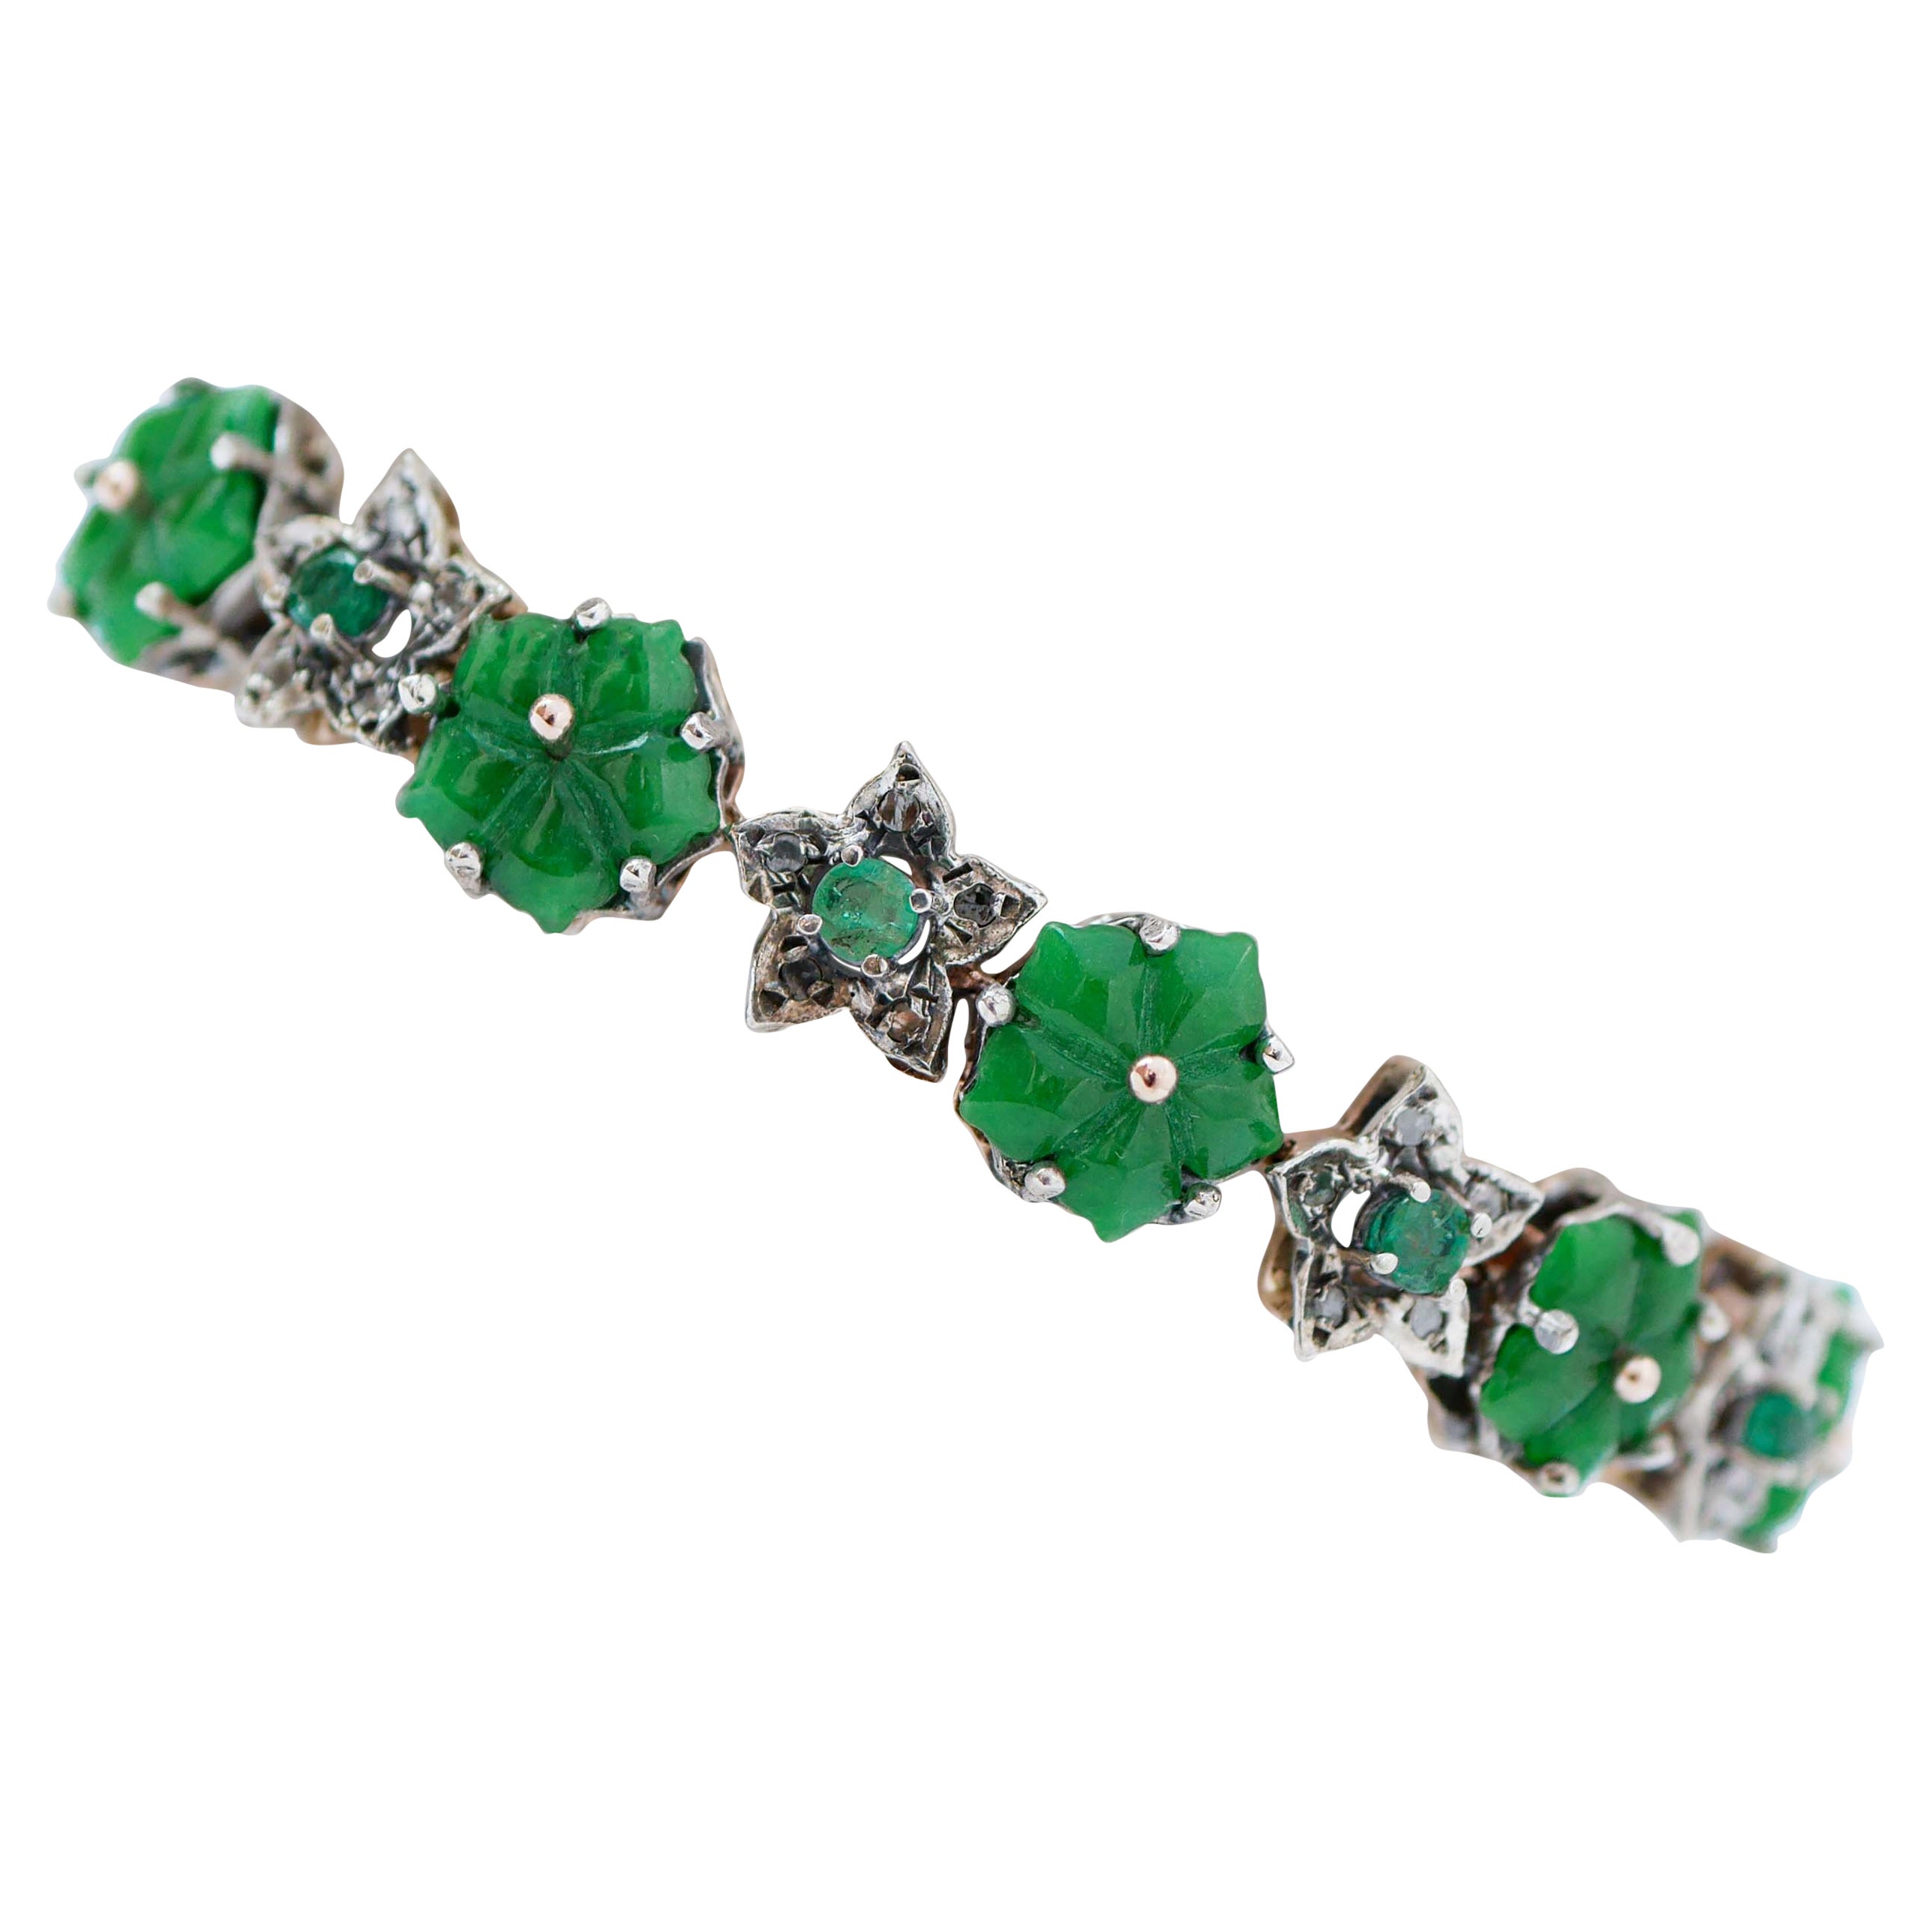 Green Agate Flowers, Emeralds, Diamonds, Rose Gold and Silver Bracelet.